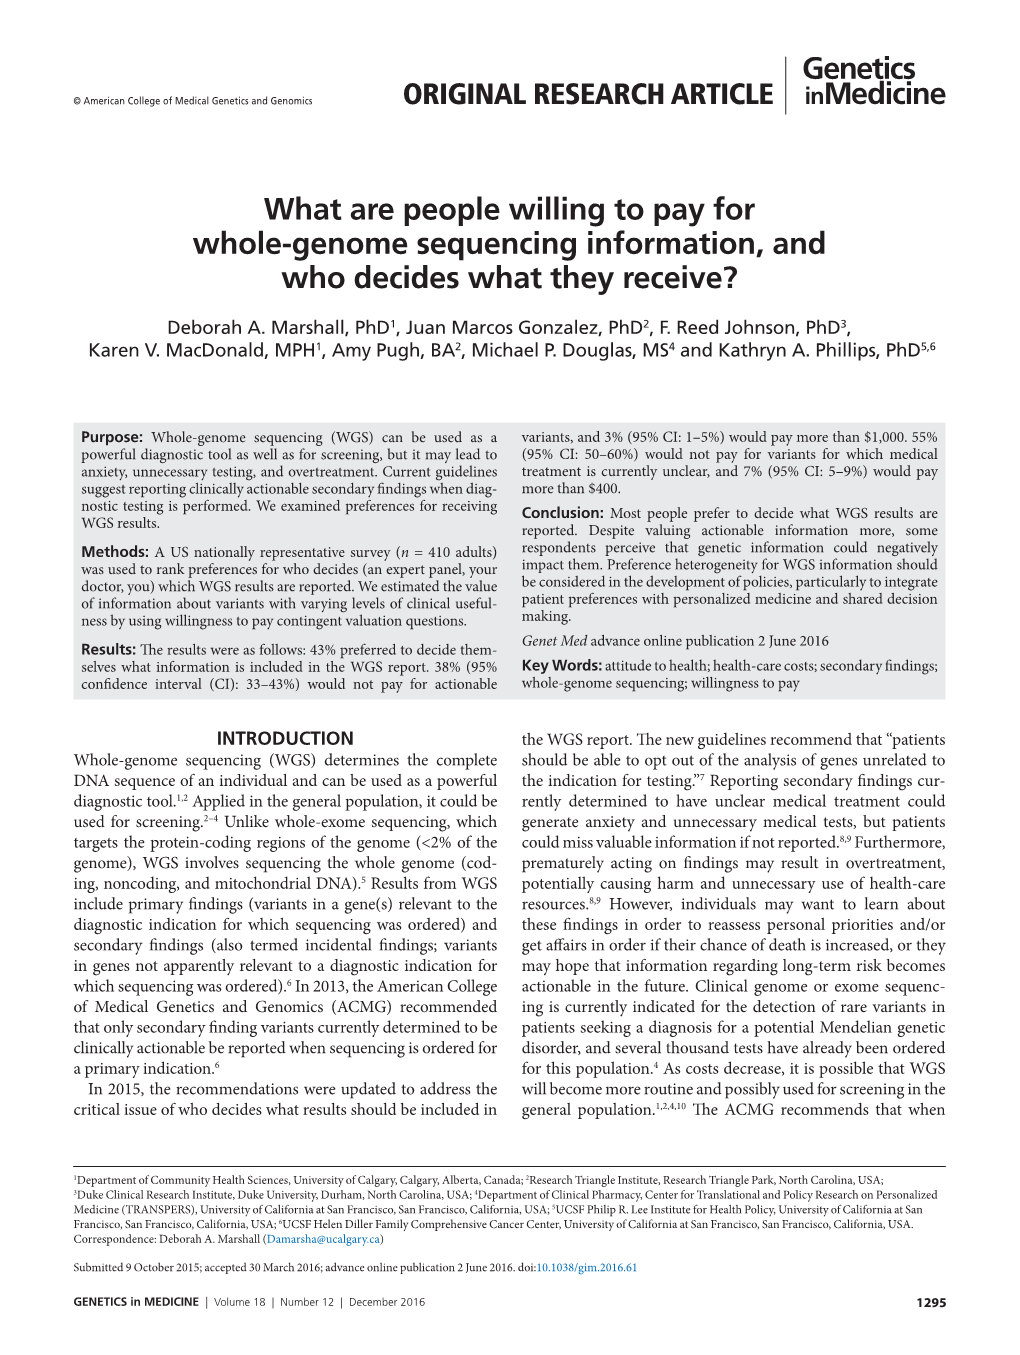 What Are People Willing to Pay for Whole-Genome Sequencing Information, and Who Decides What They Receive?